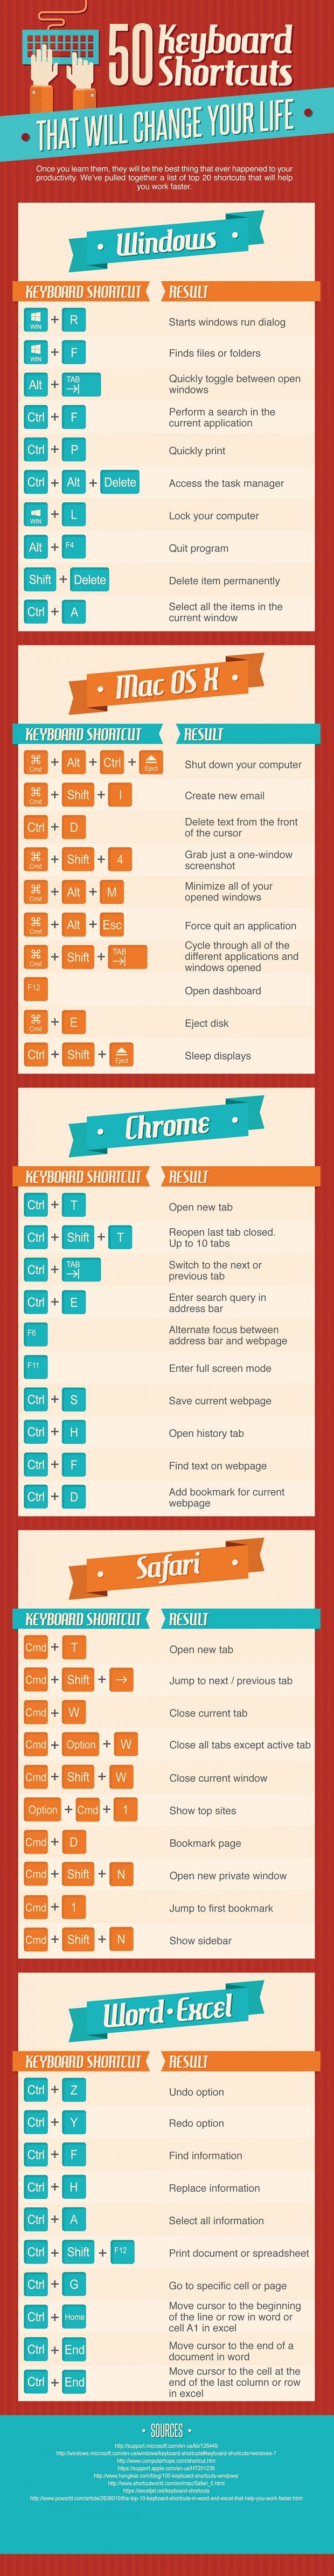 Cheat Sheets for Web Designers - visualistan developers